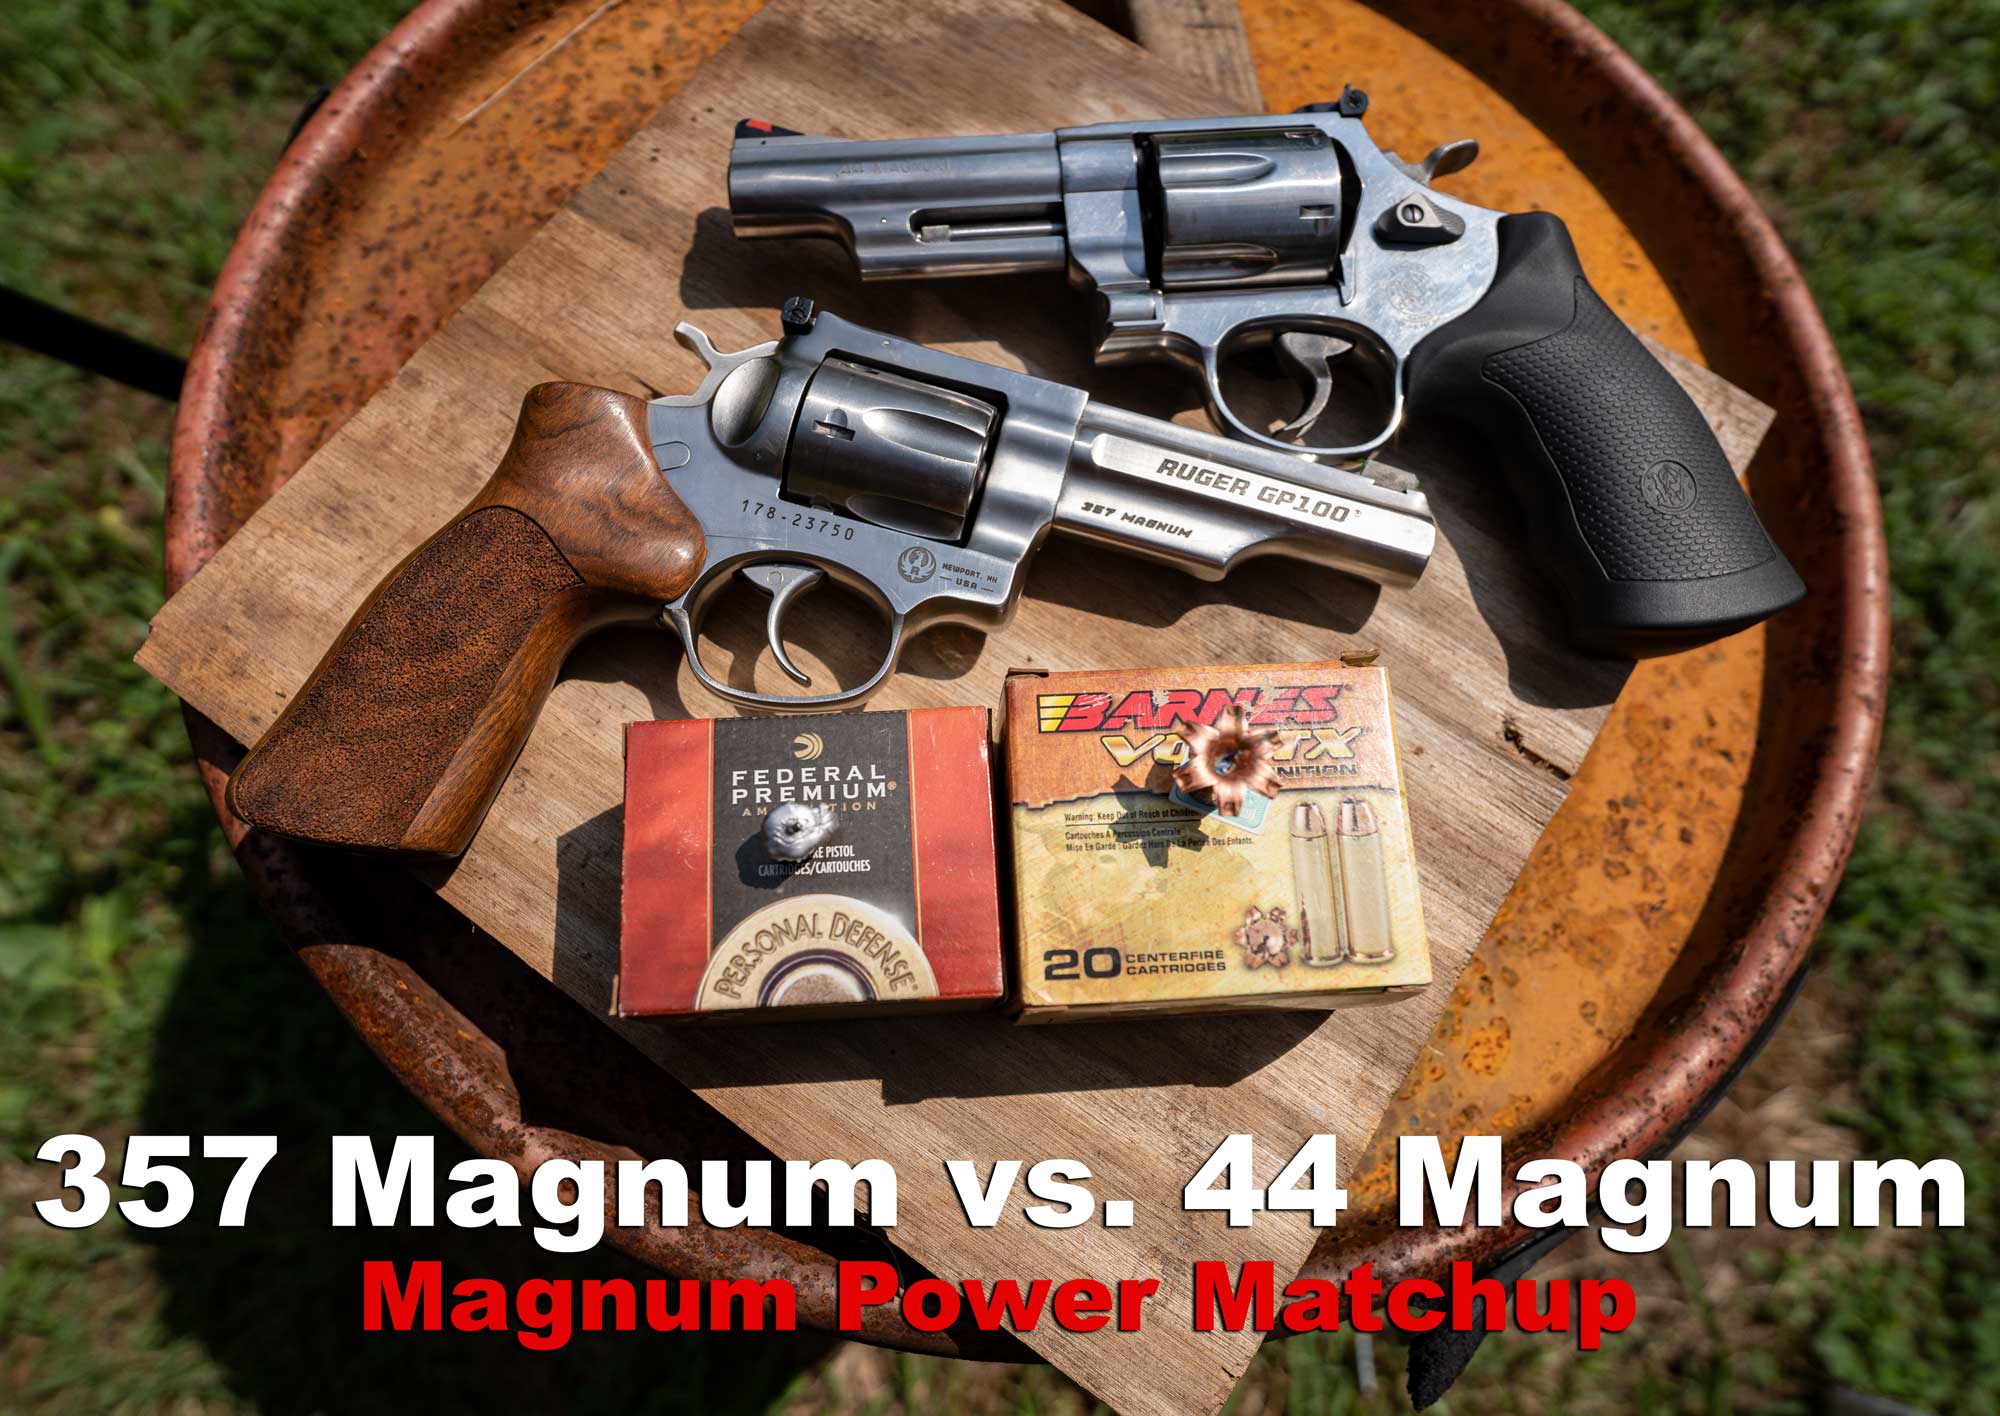 357 magnum vs 44 magnum revolvers side by side with ammo